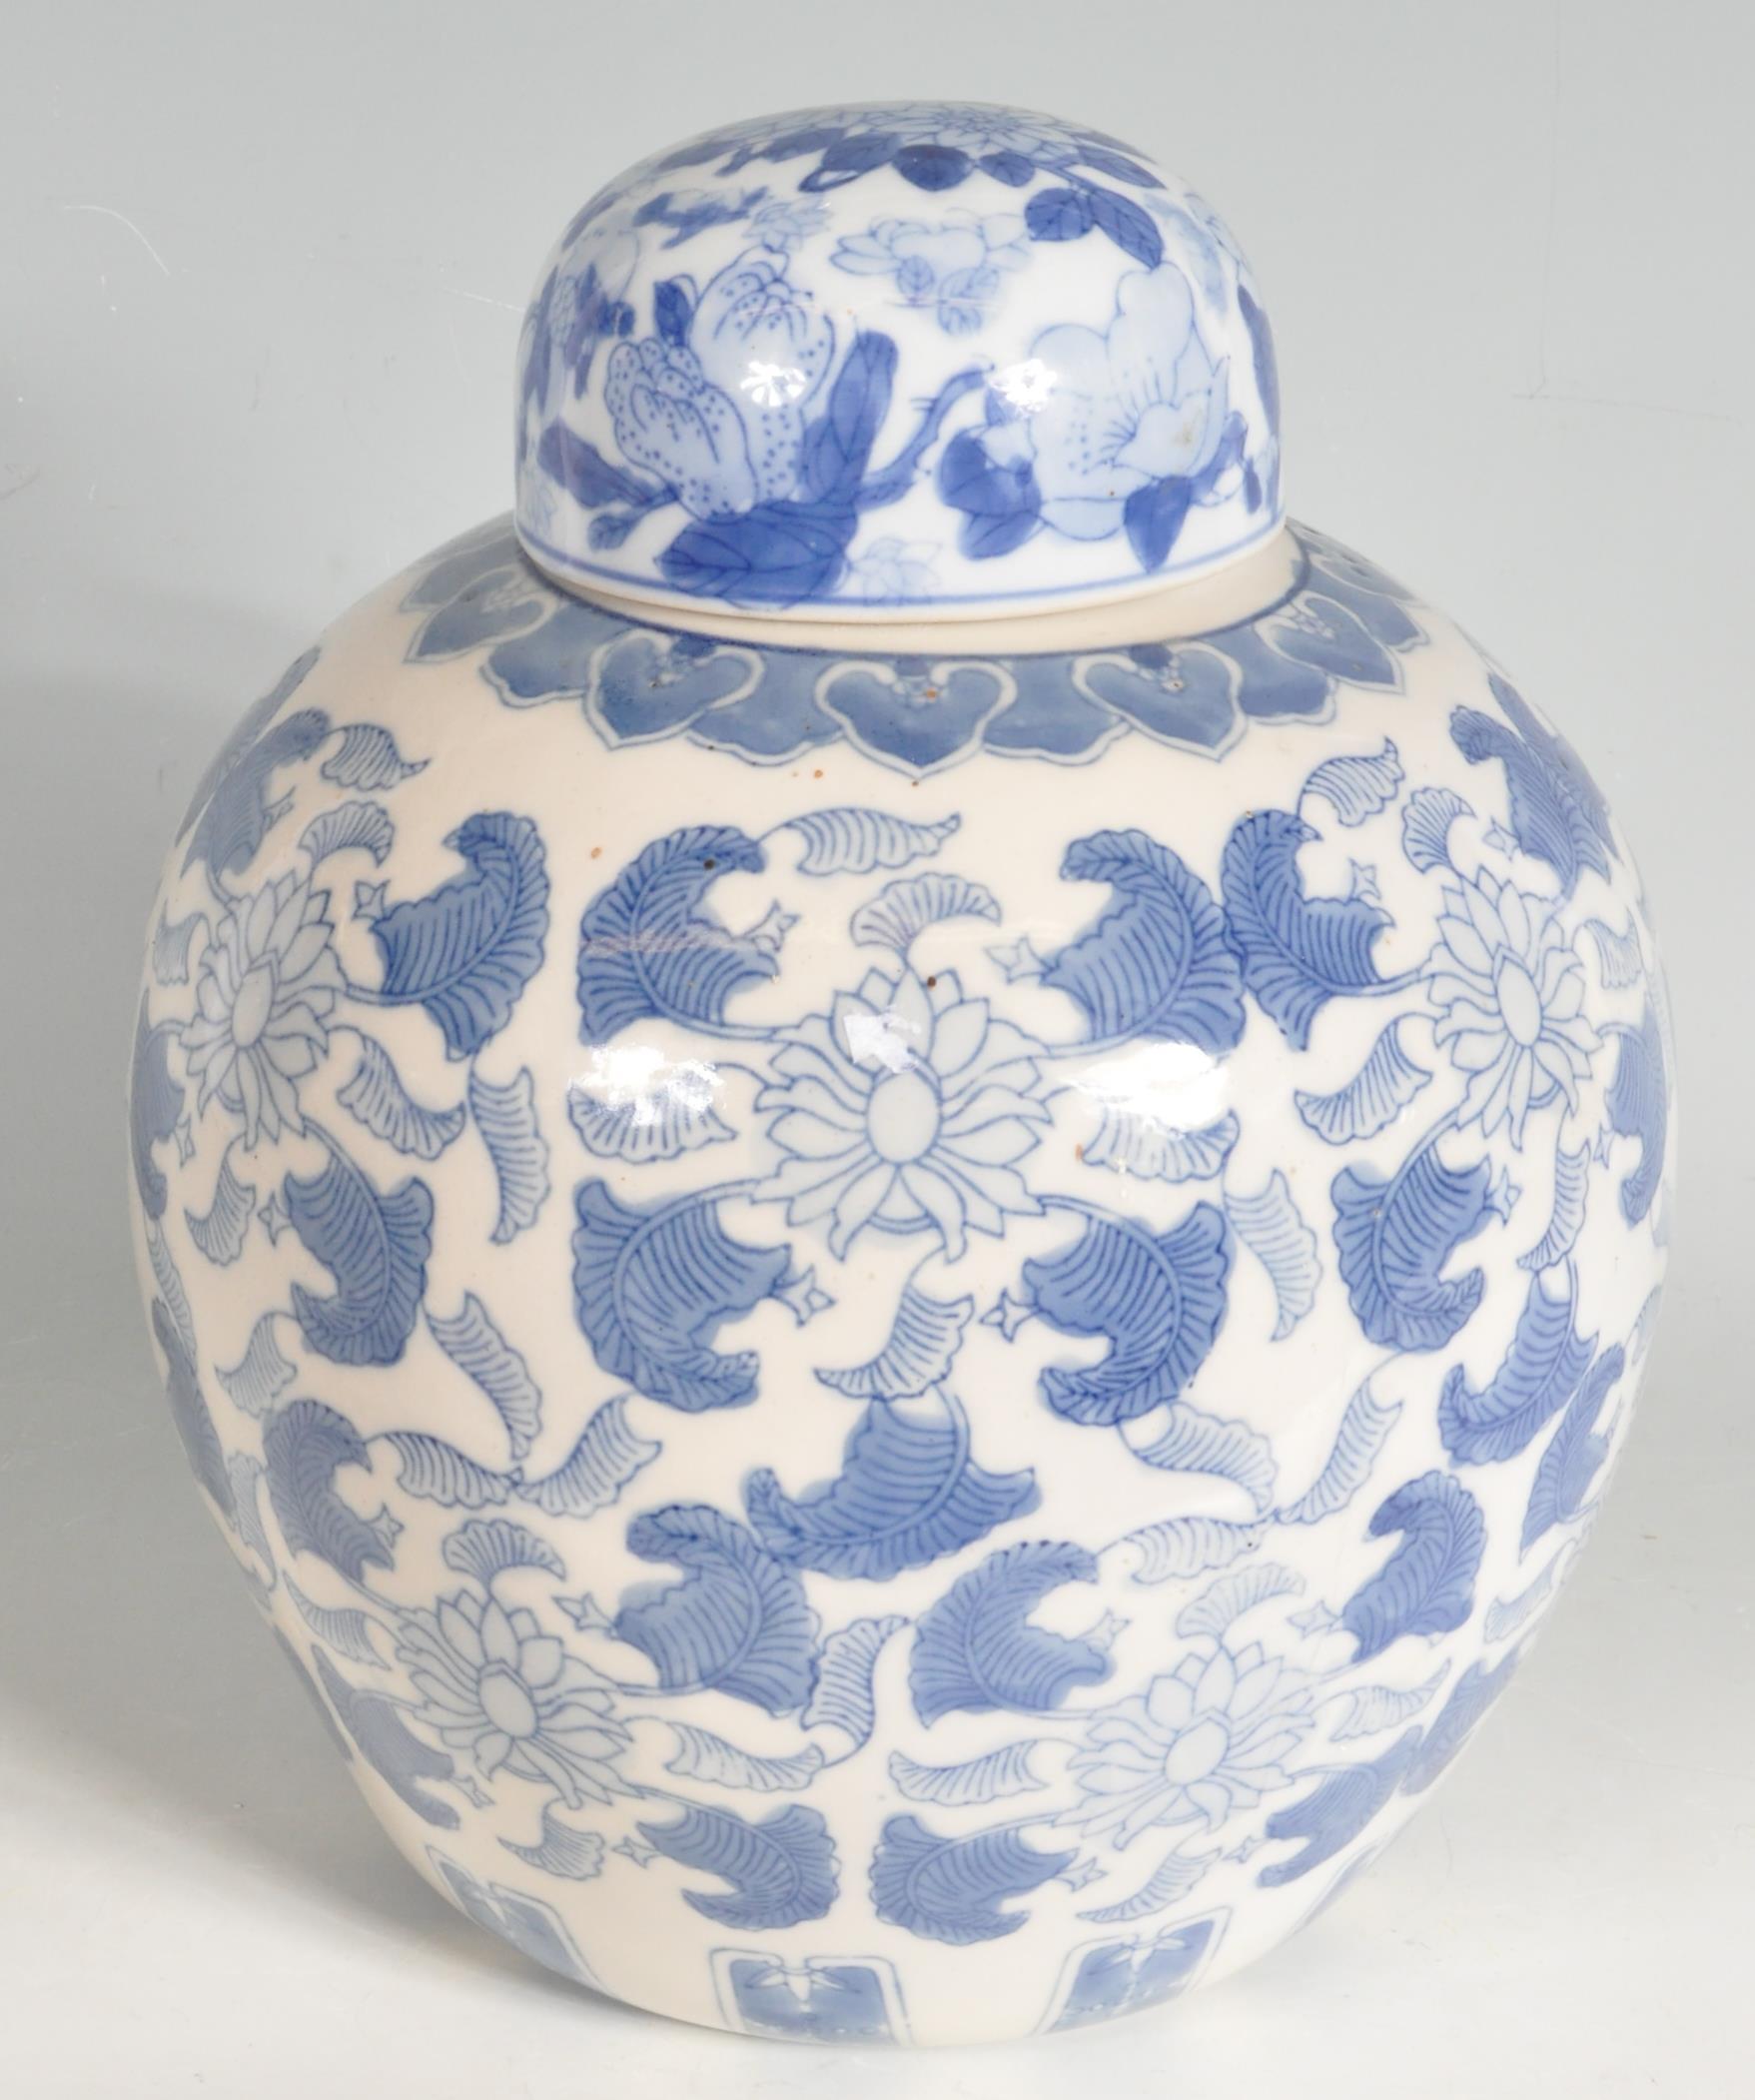 LARGE CHINESE 20TH CENTURY CERMAIC CHINESE BLUE AND WHITE GINGER JAR - Image 2 of 10